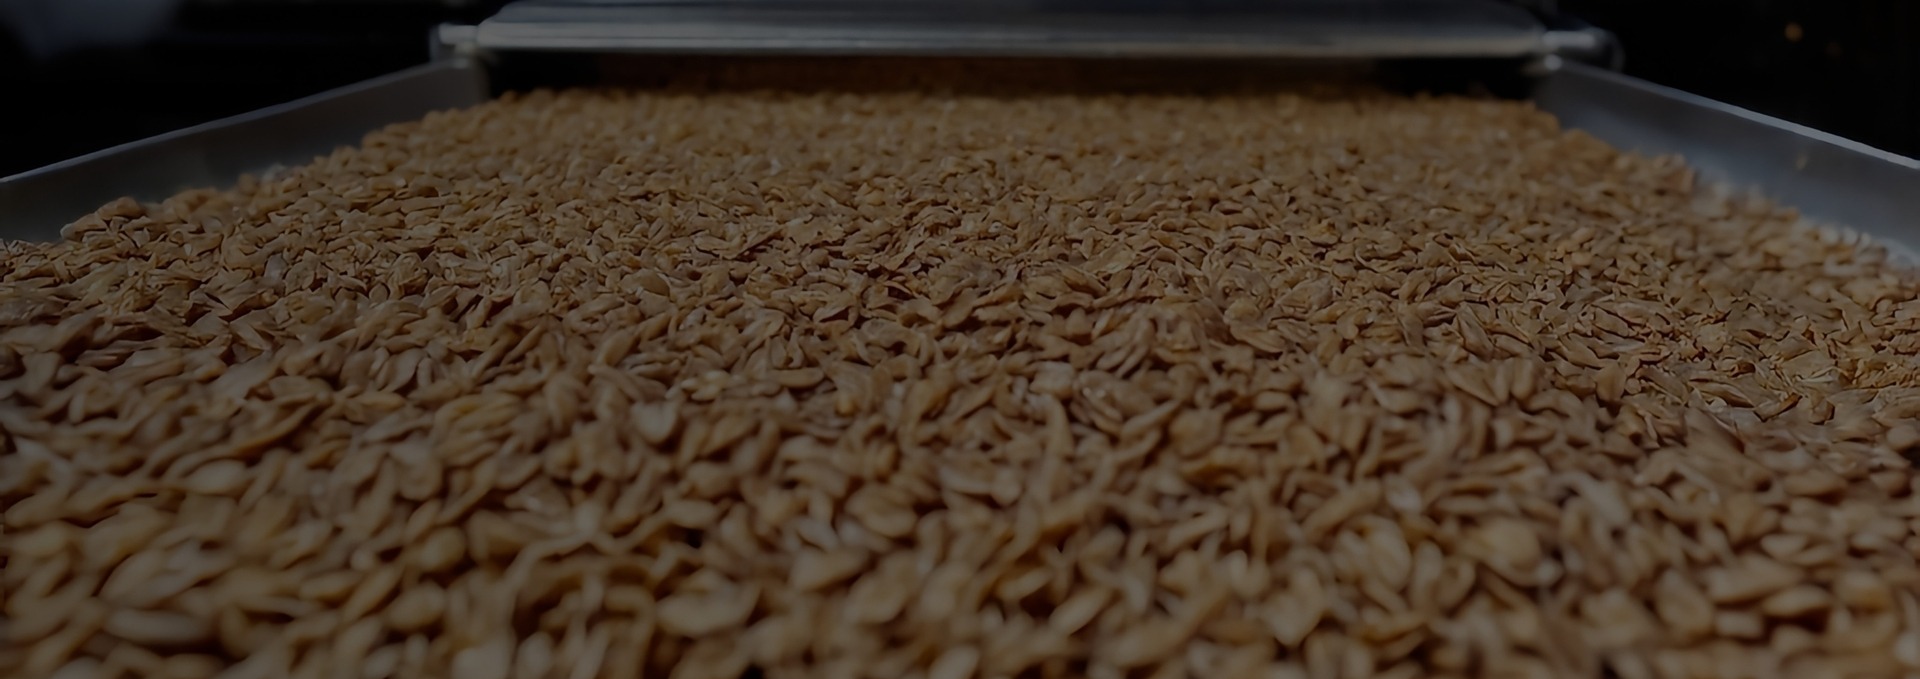 Conveyor belt full of cereal grains in food production process.